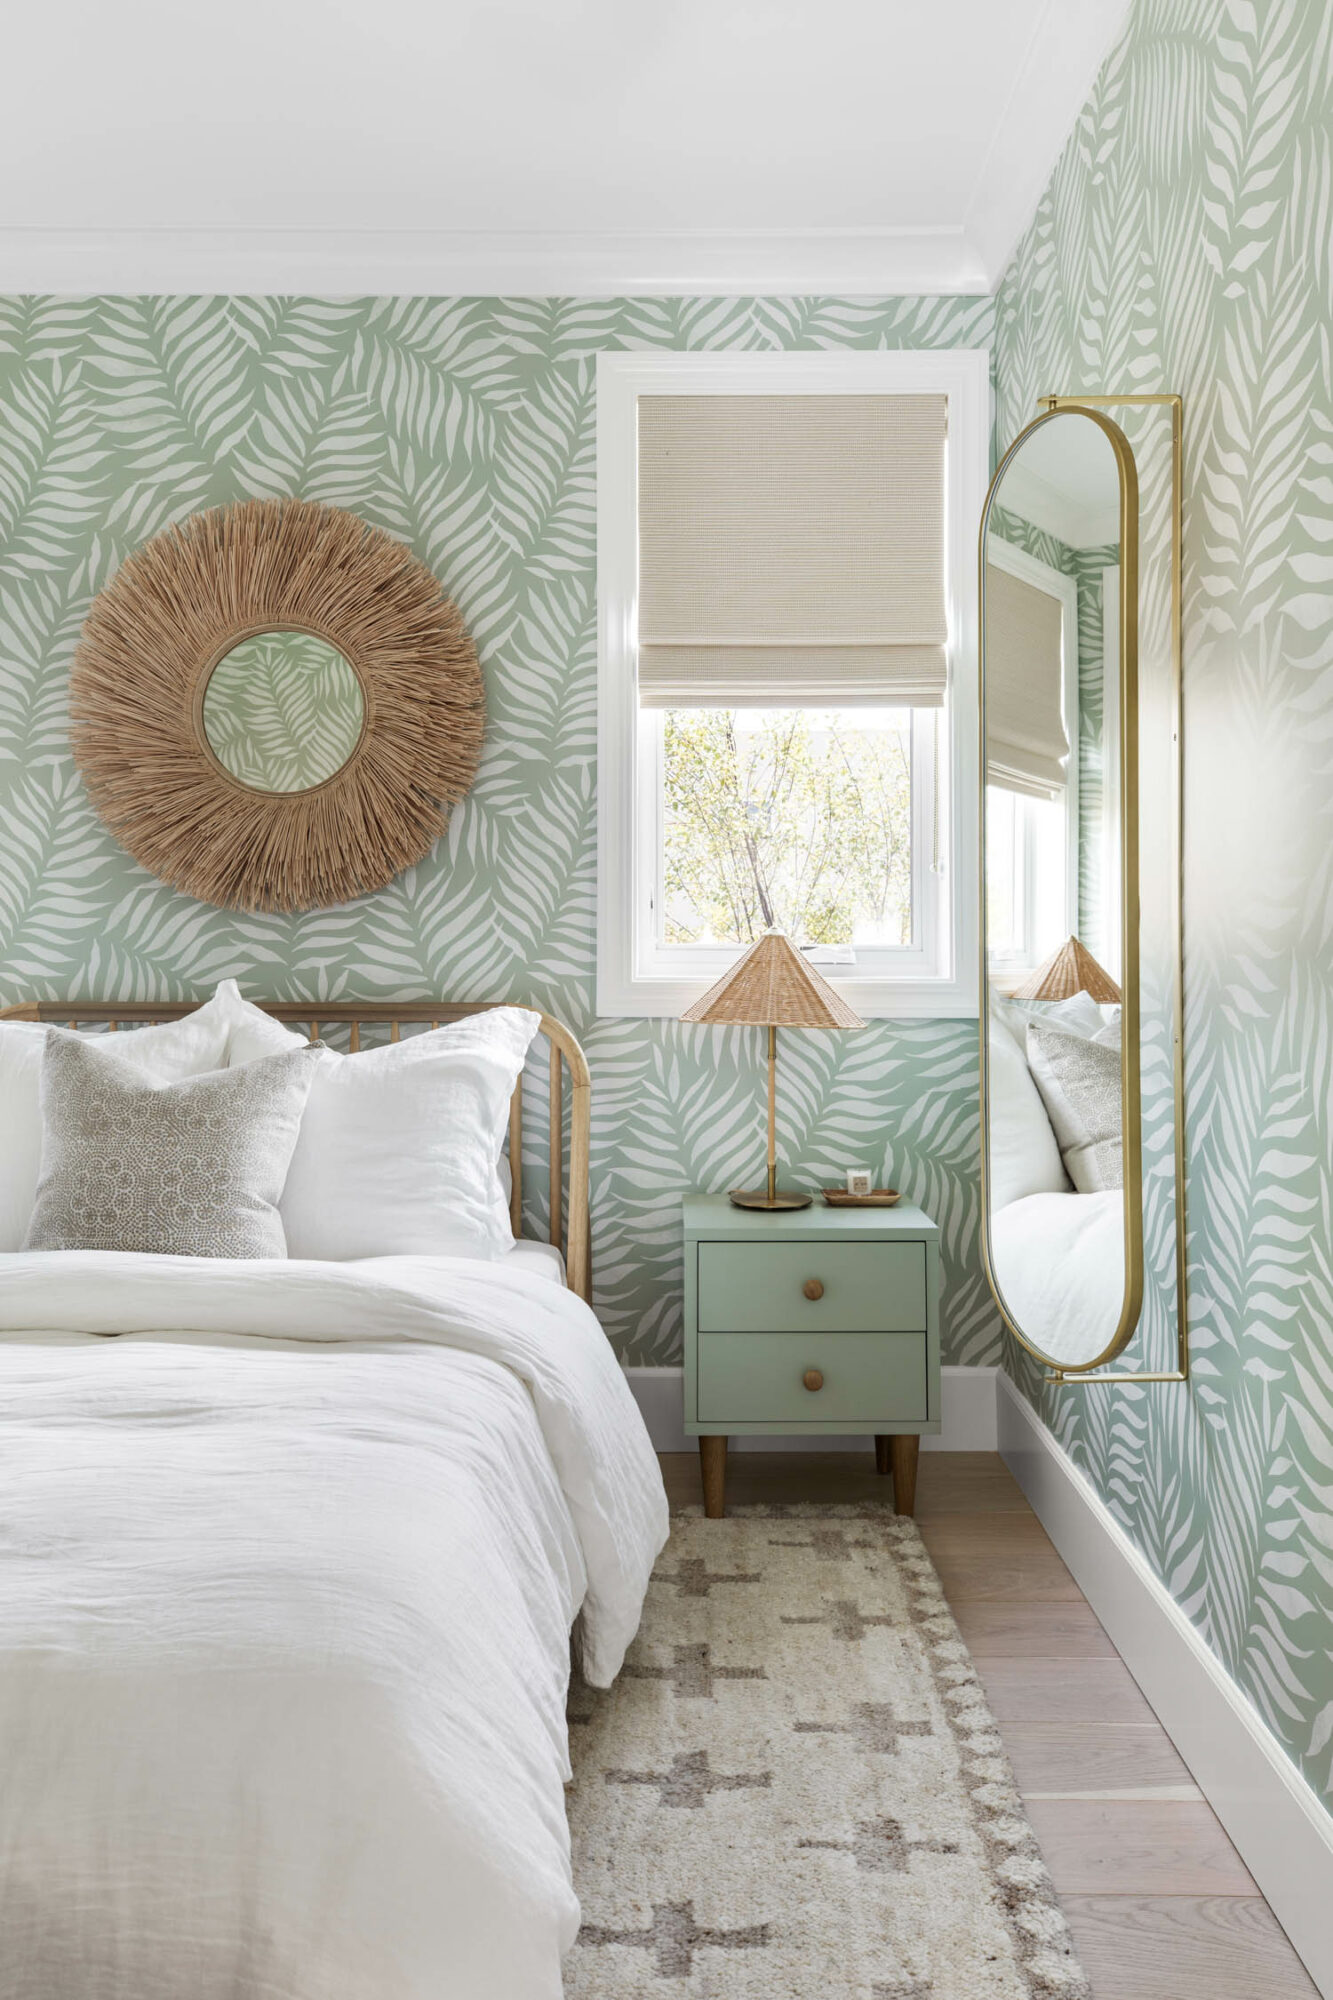 floral wallpaper with a green and white leaf design